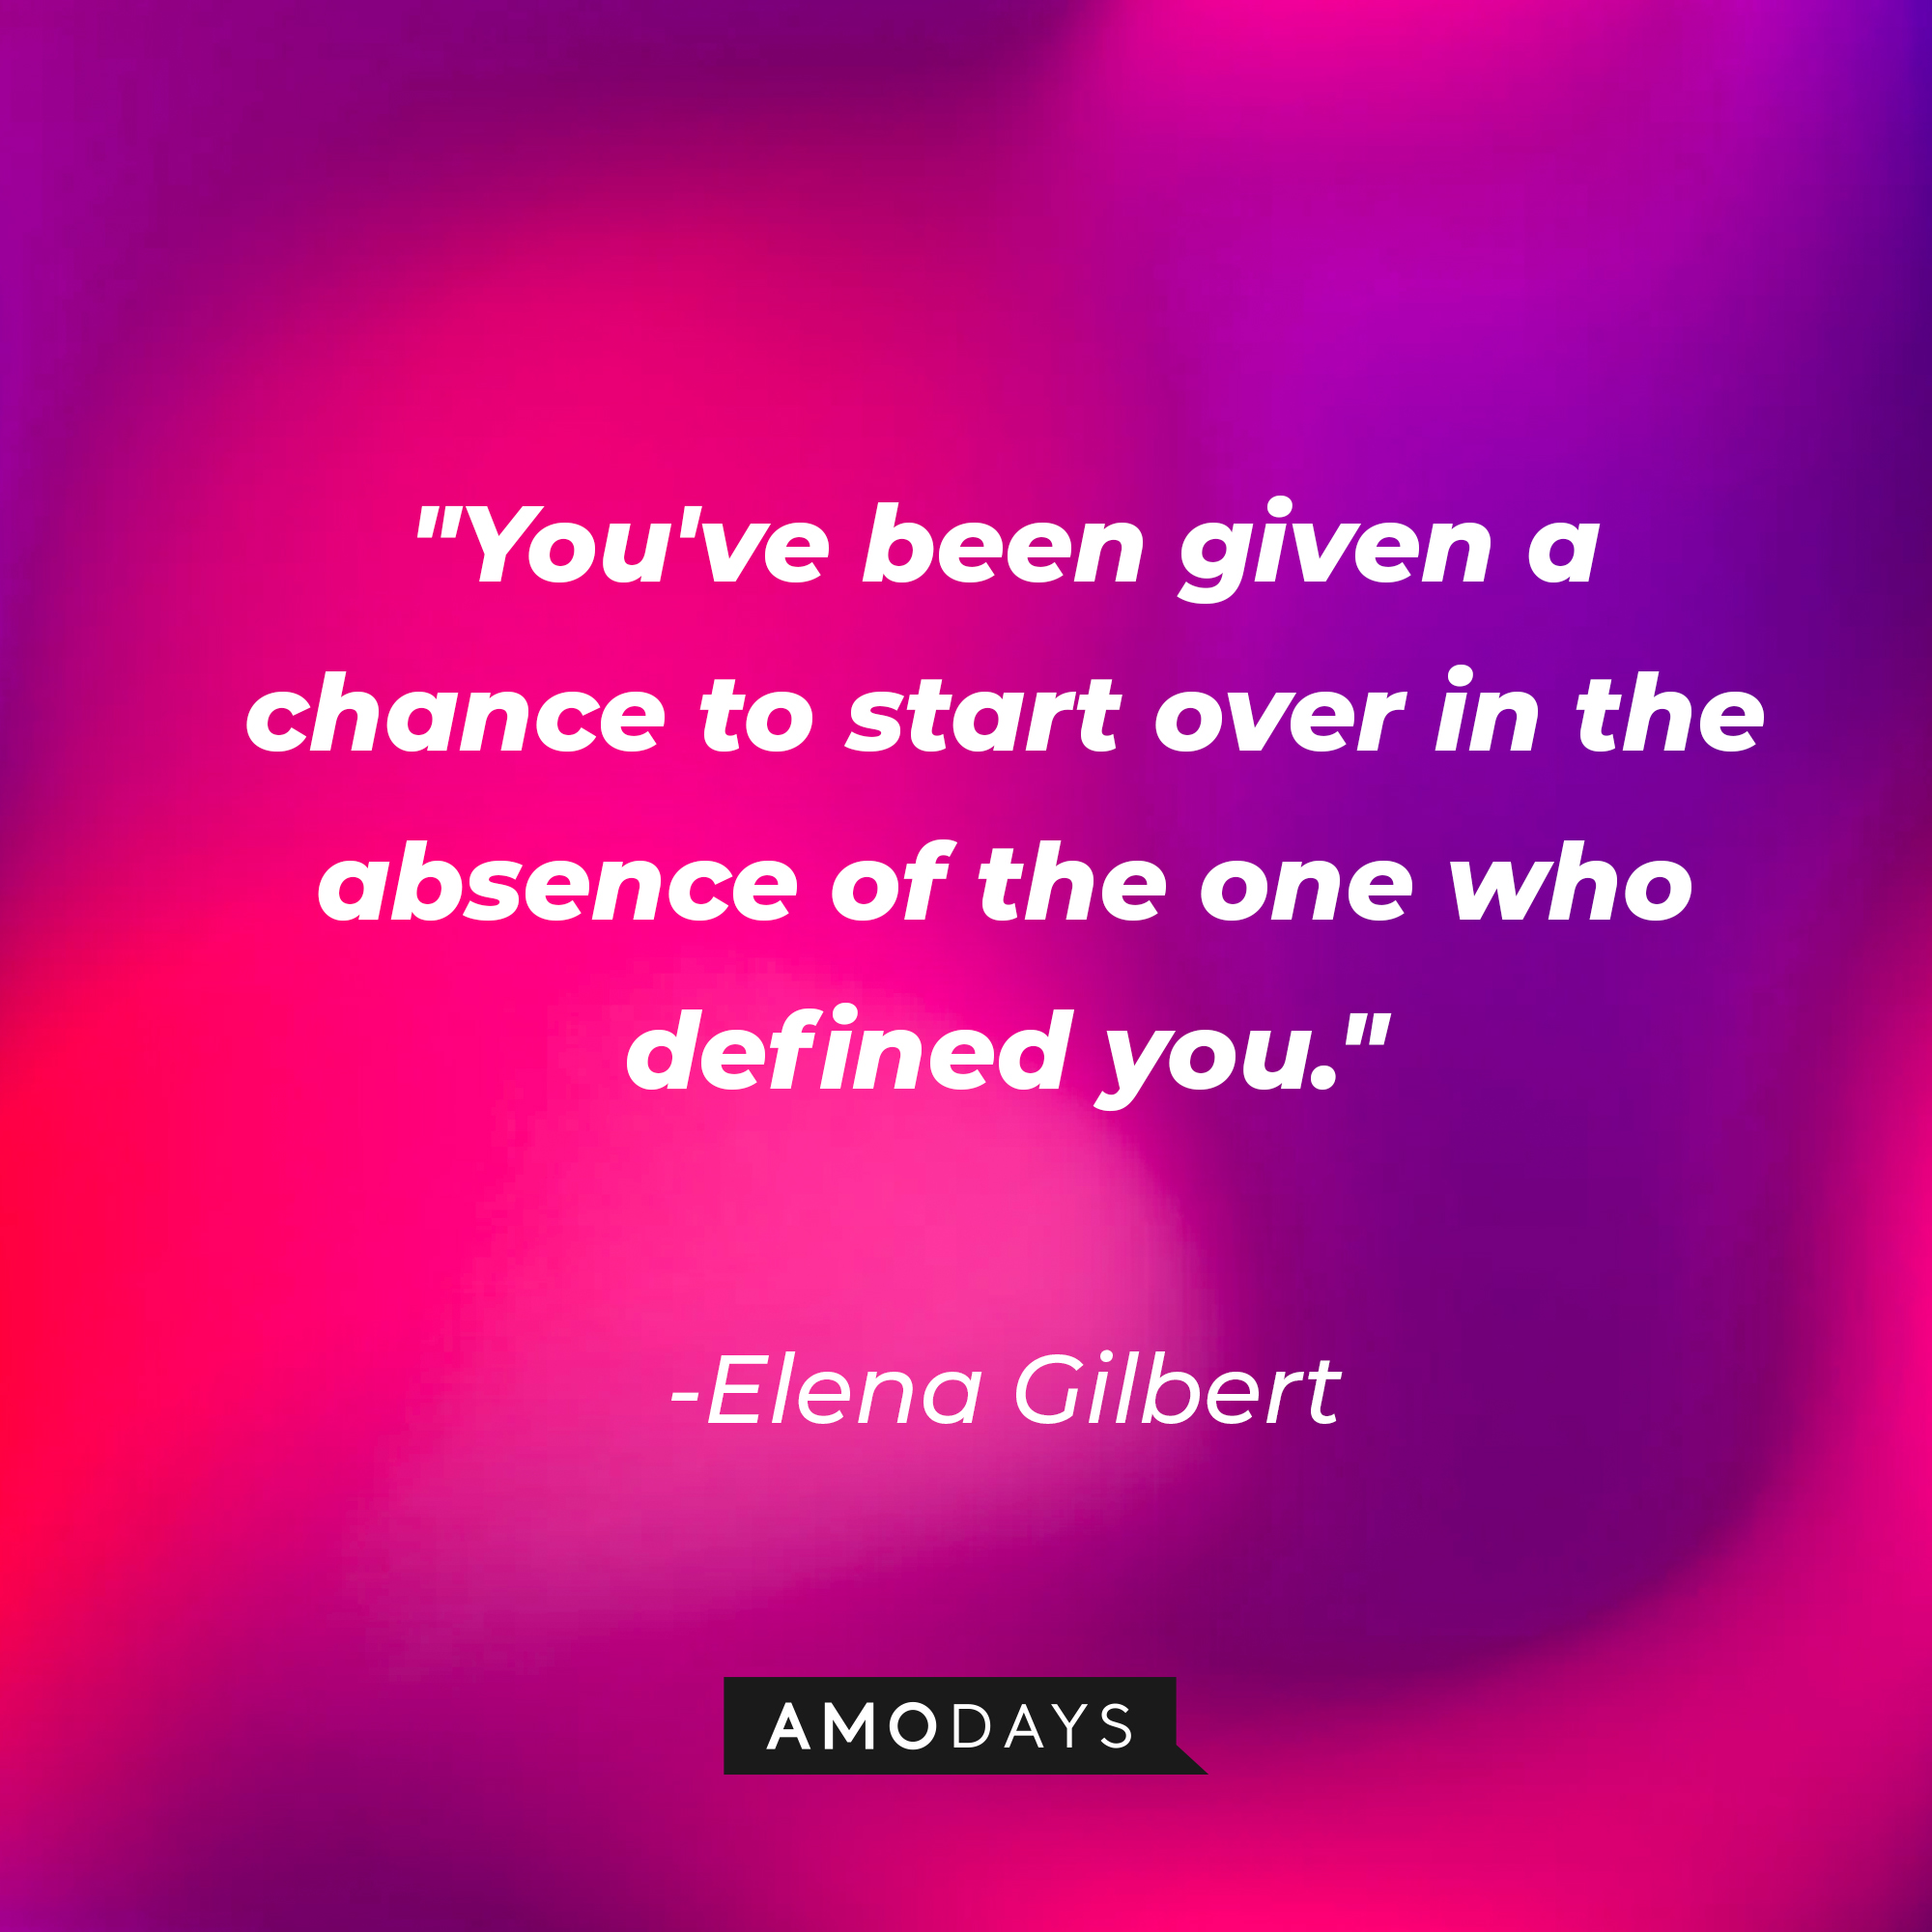 Elena Gilbert's quote: "You've been given a chance to start over in the absence of the one who defined you." | Image: AmoDays